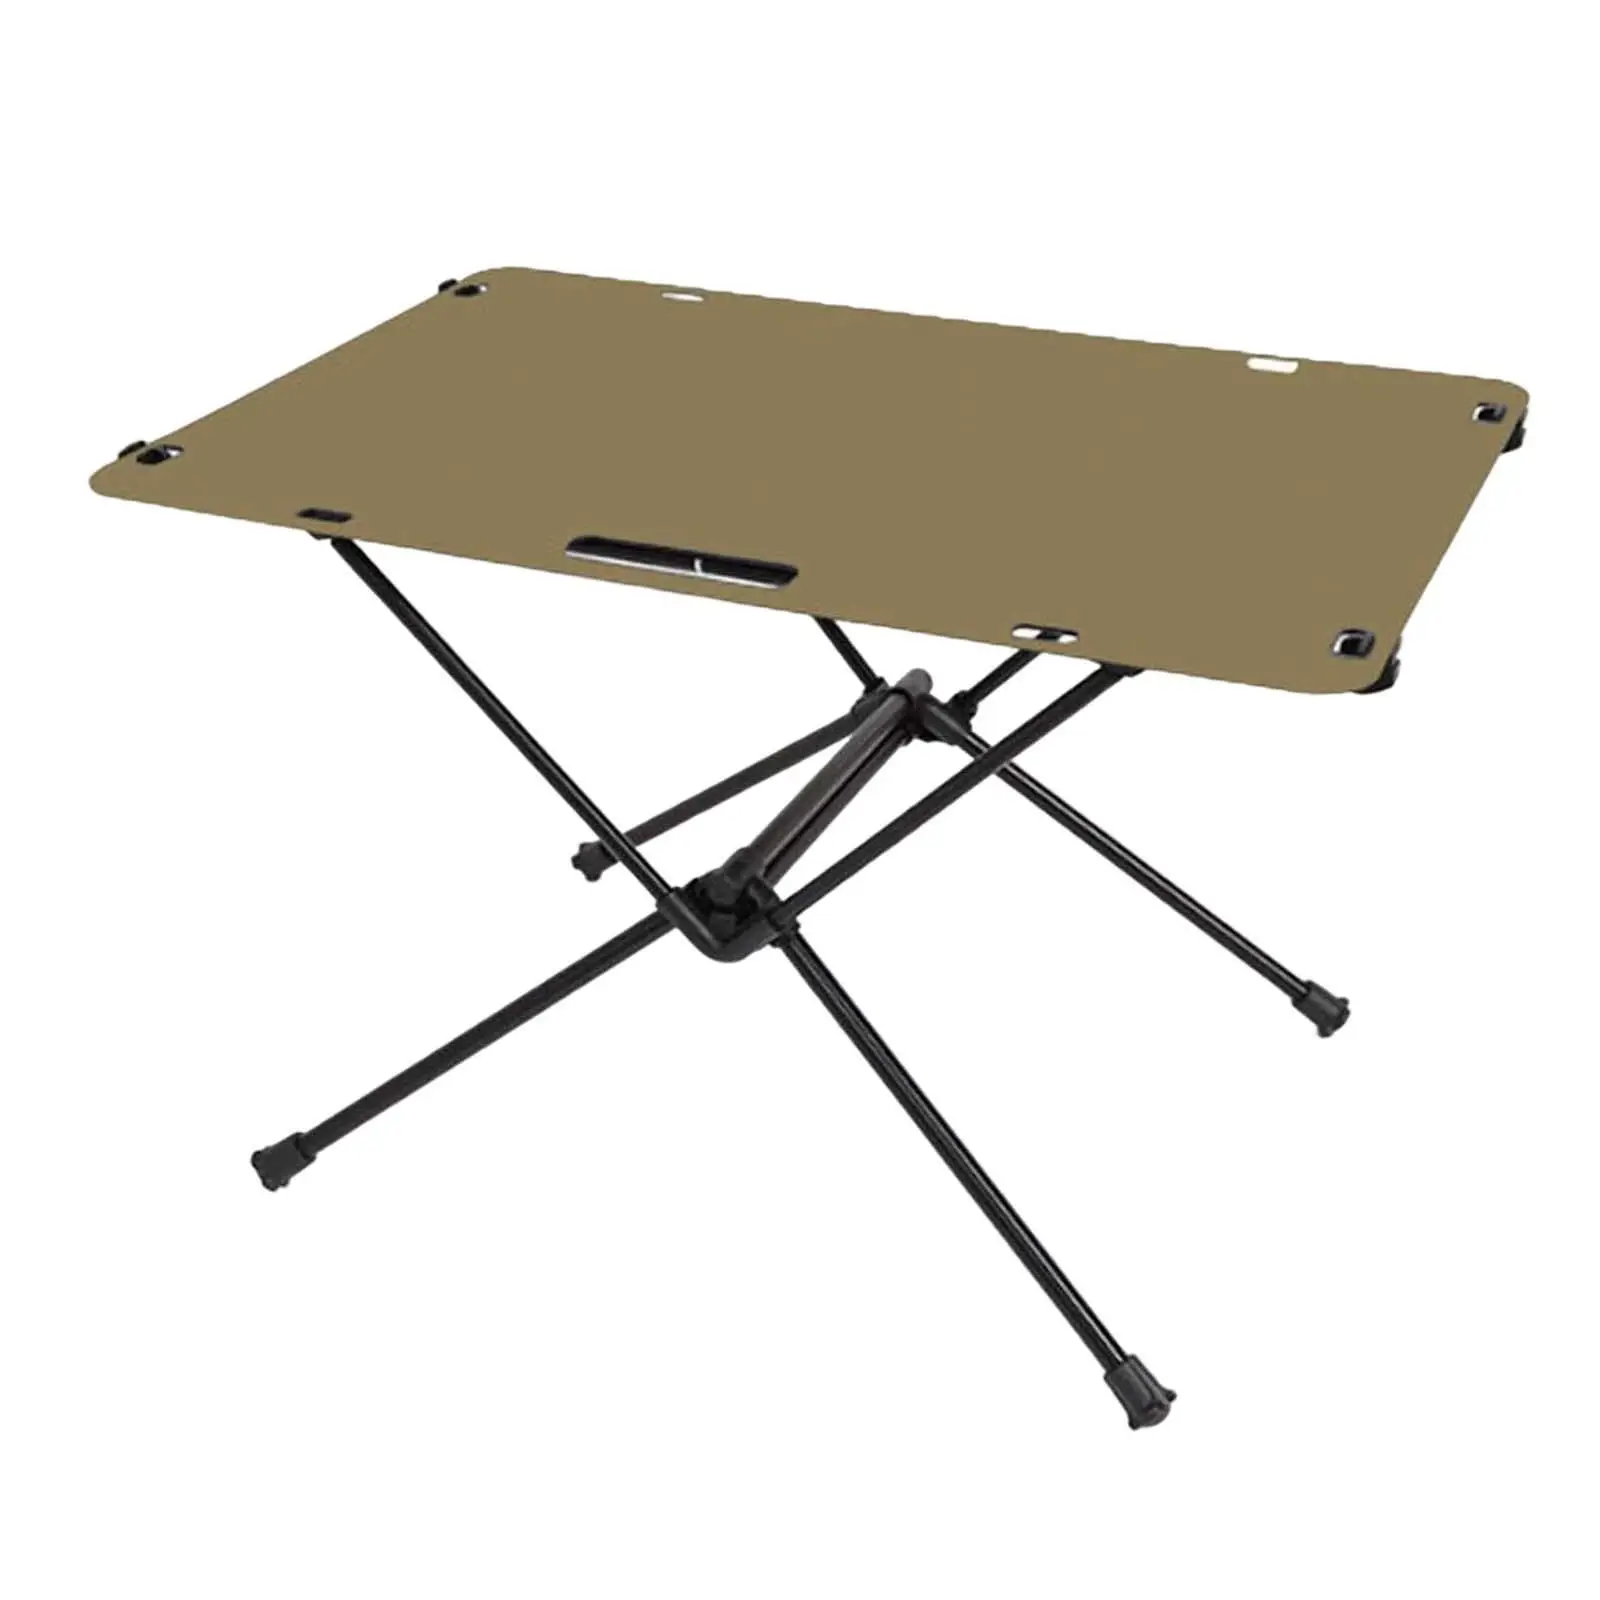 Portable Folding Beach Table with Storage Bag Patio Side Tables Garden Camping Table for Cooking Kitchen Yard Travel Backpacking